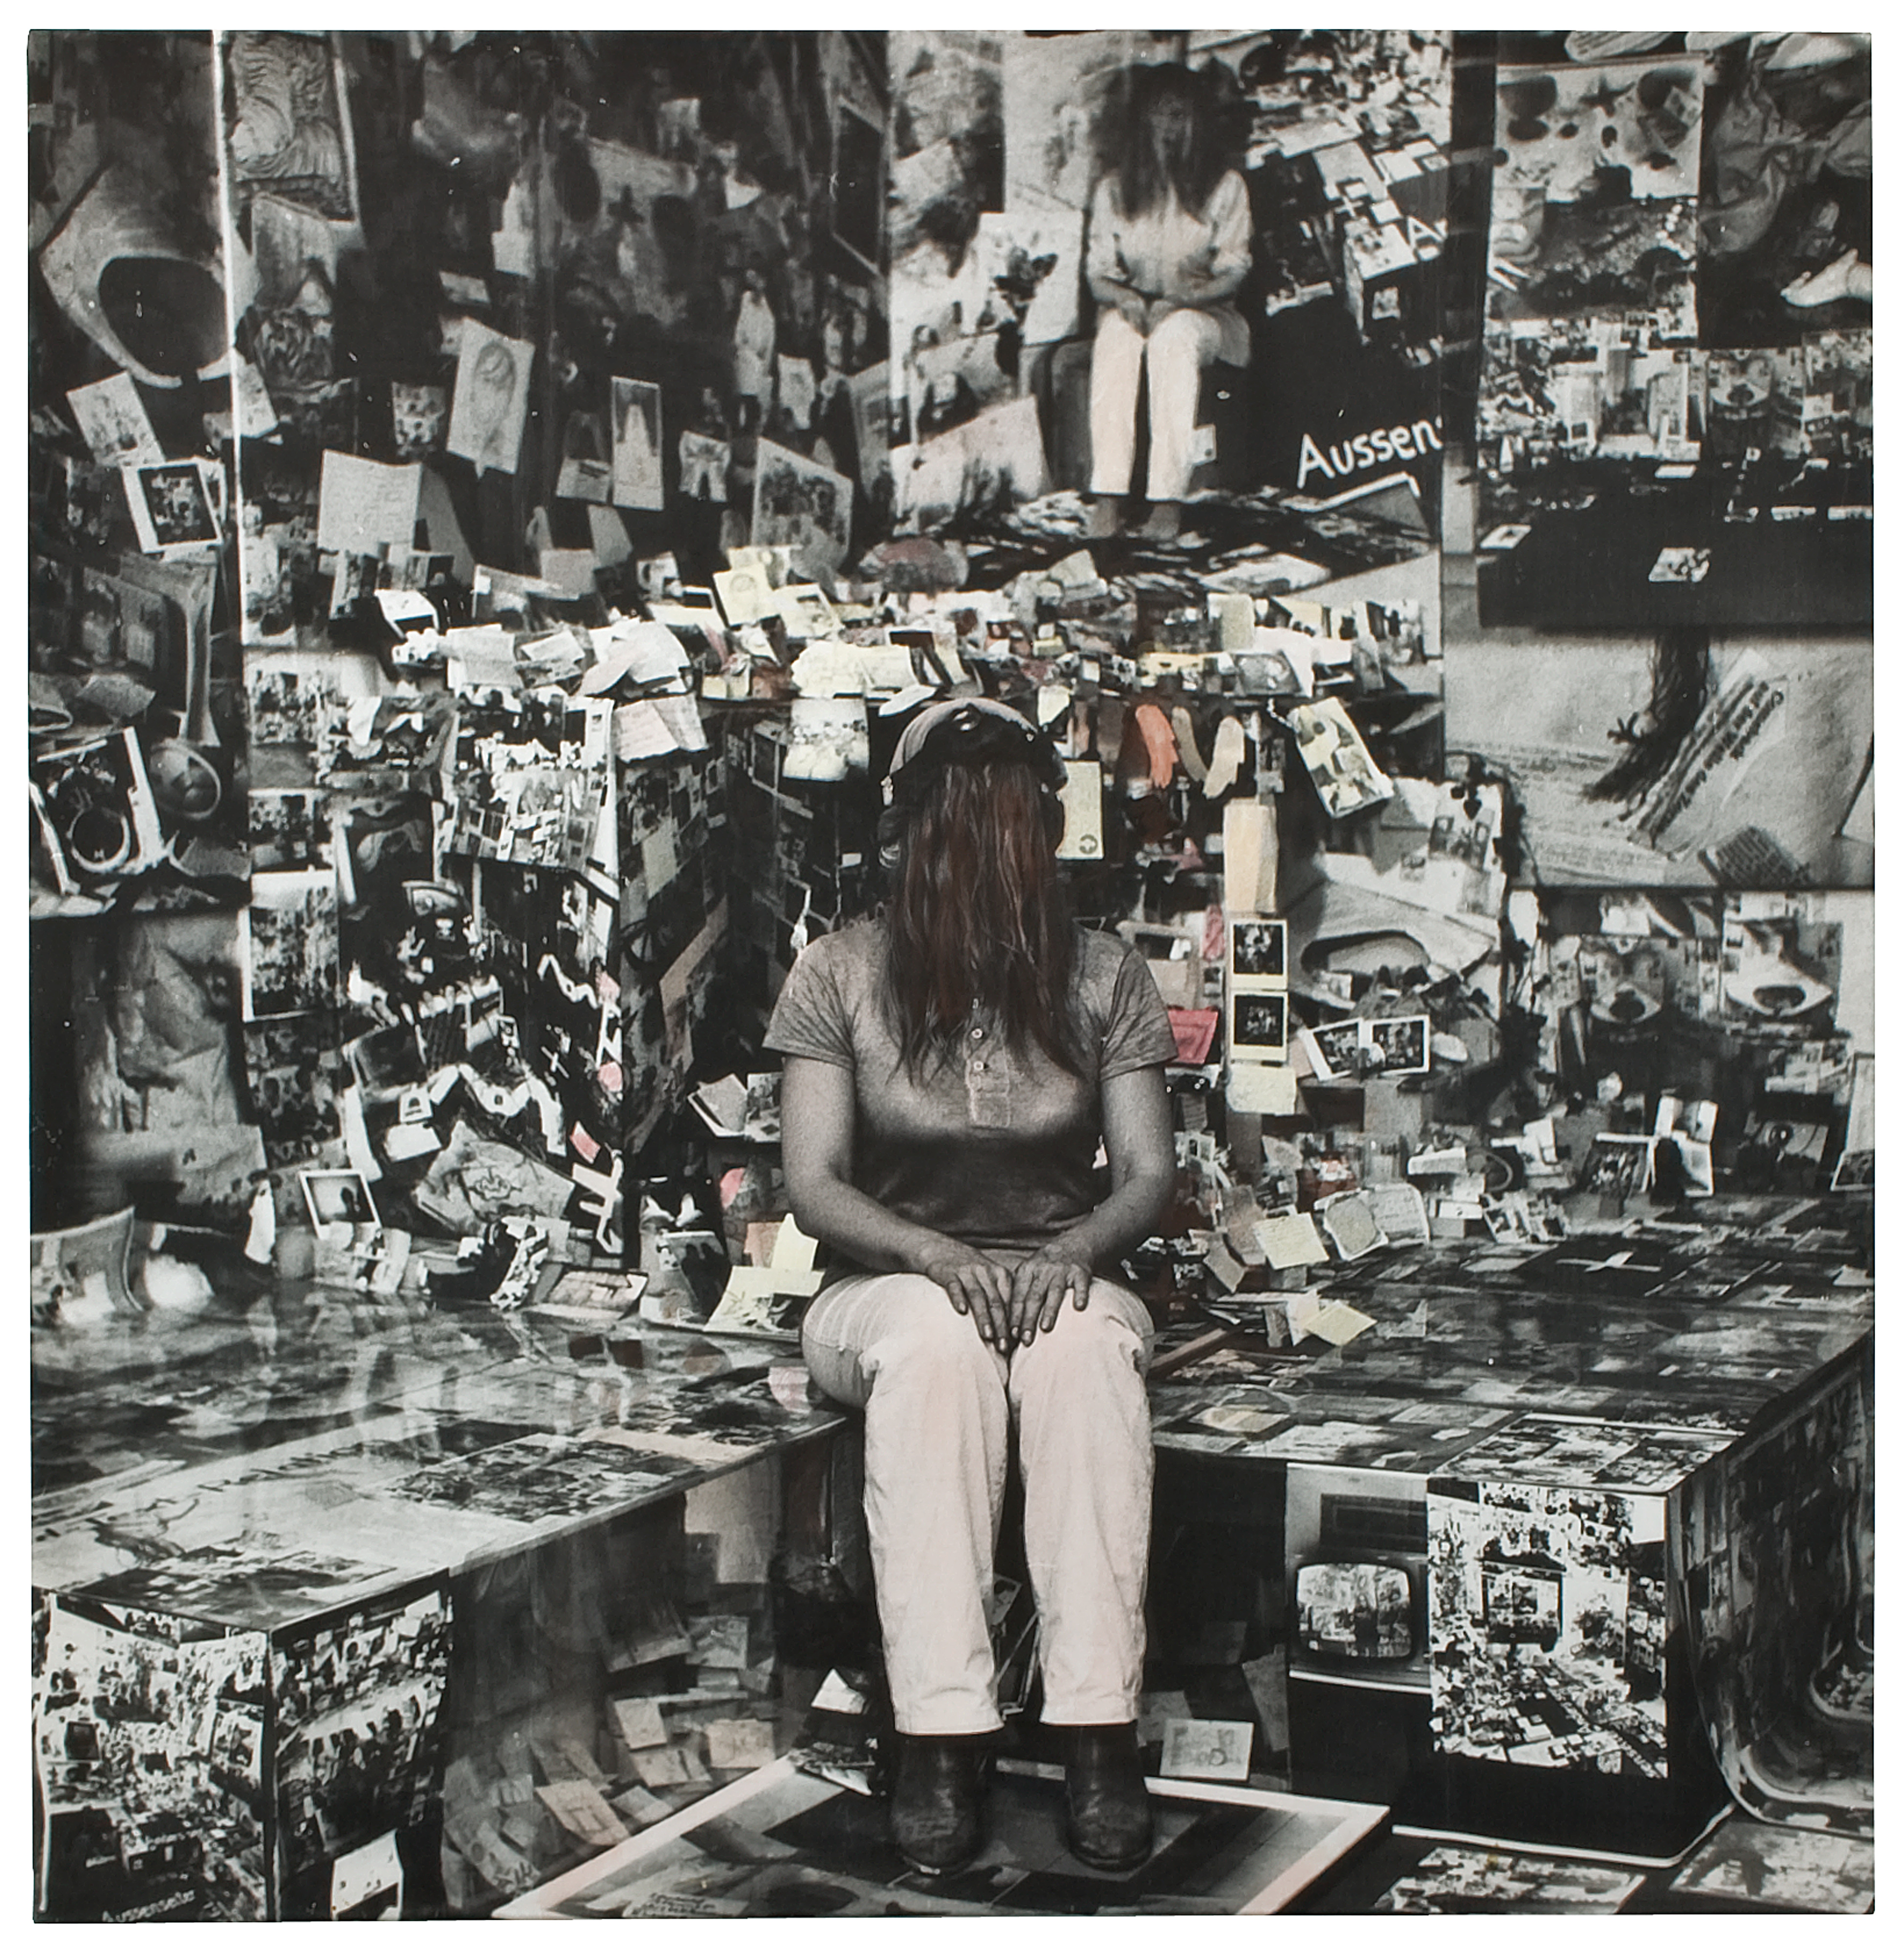 Galerie Barbara Thumm \ Anna Oppermann: Being different, 1970-86 (AOp-81-0138) \ Being different, 1970-86 (1981)